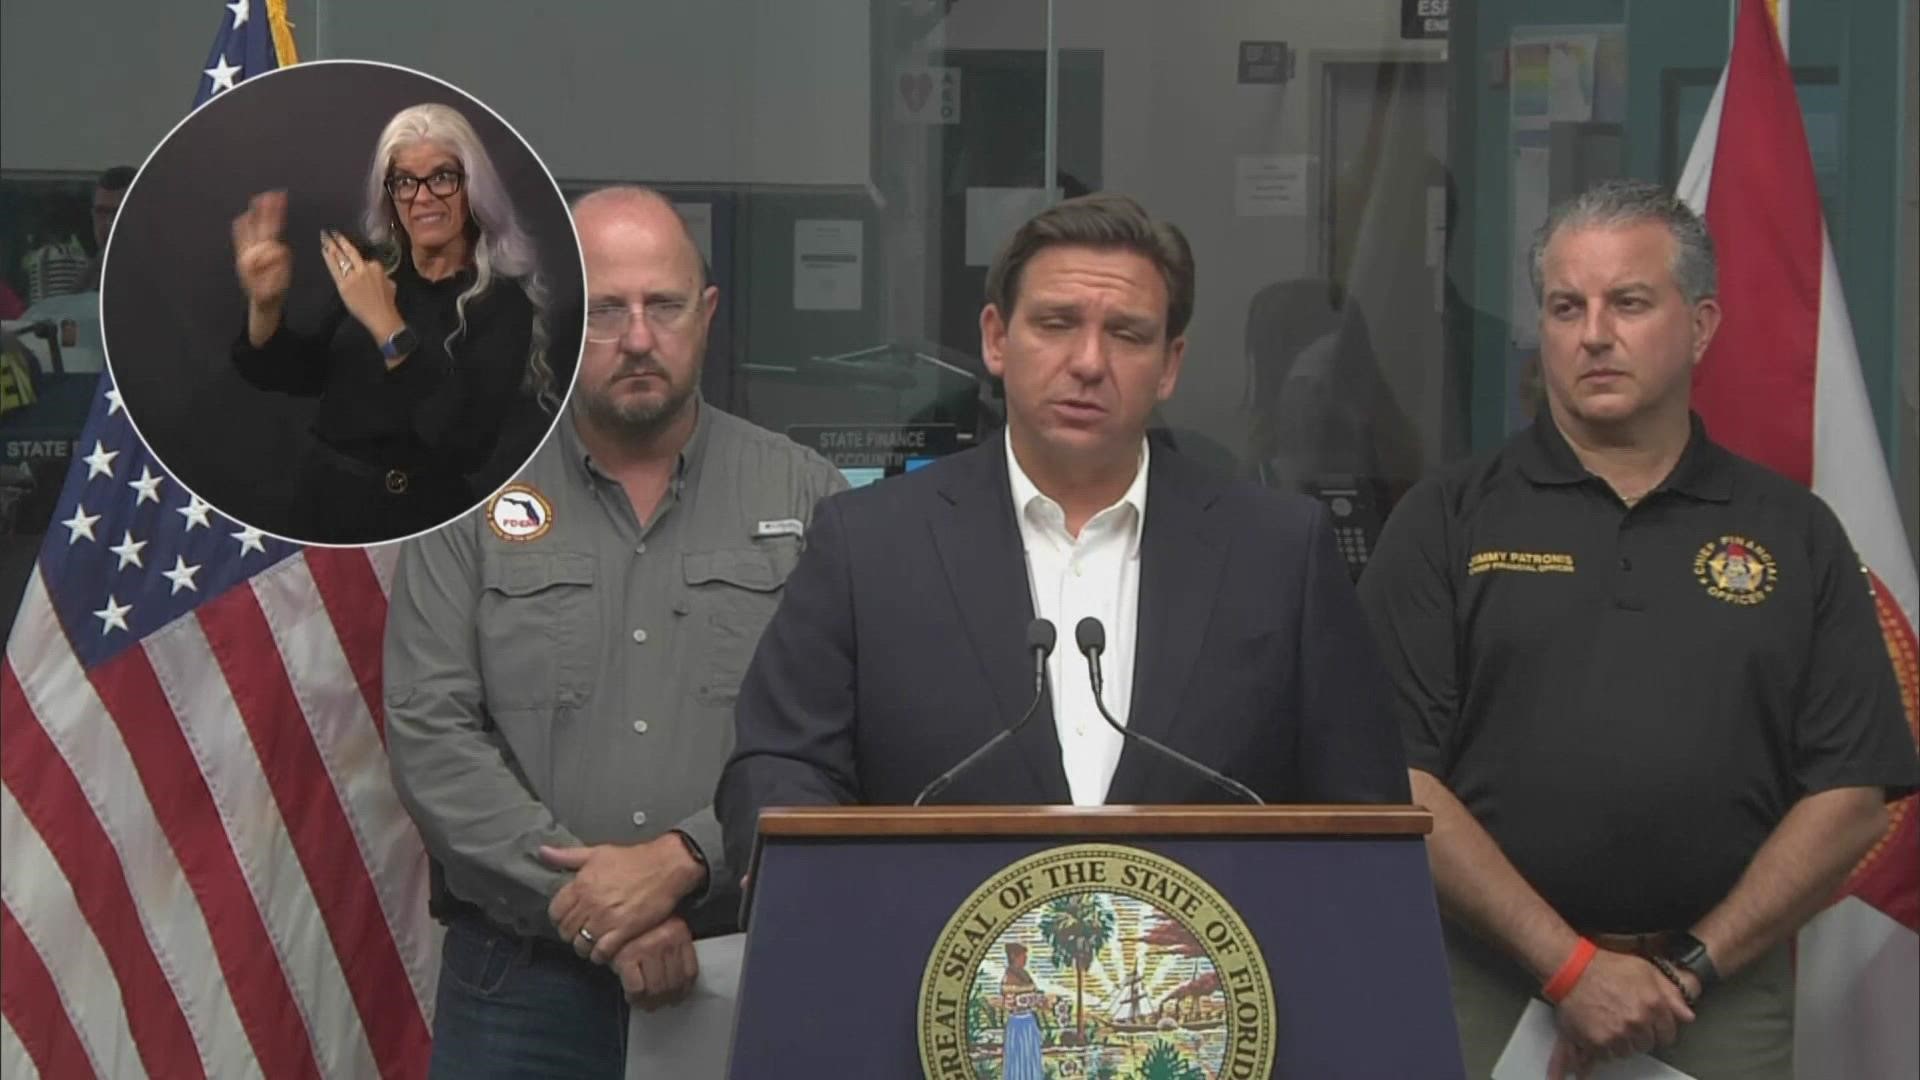 DeSantis spoke at in Tallahassee Tuesday night regarding updates to the state's preparedness efforts ahead of Hurricane Ian.